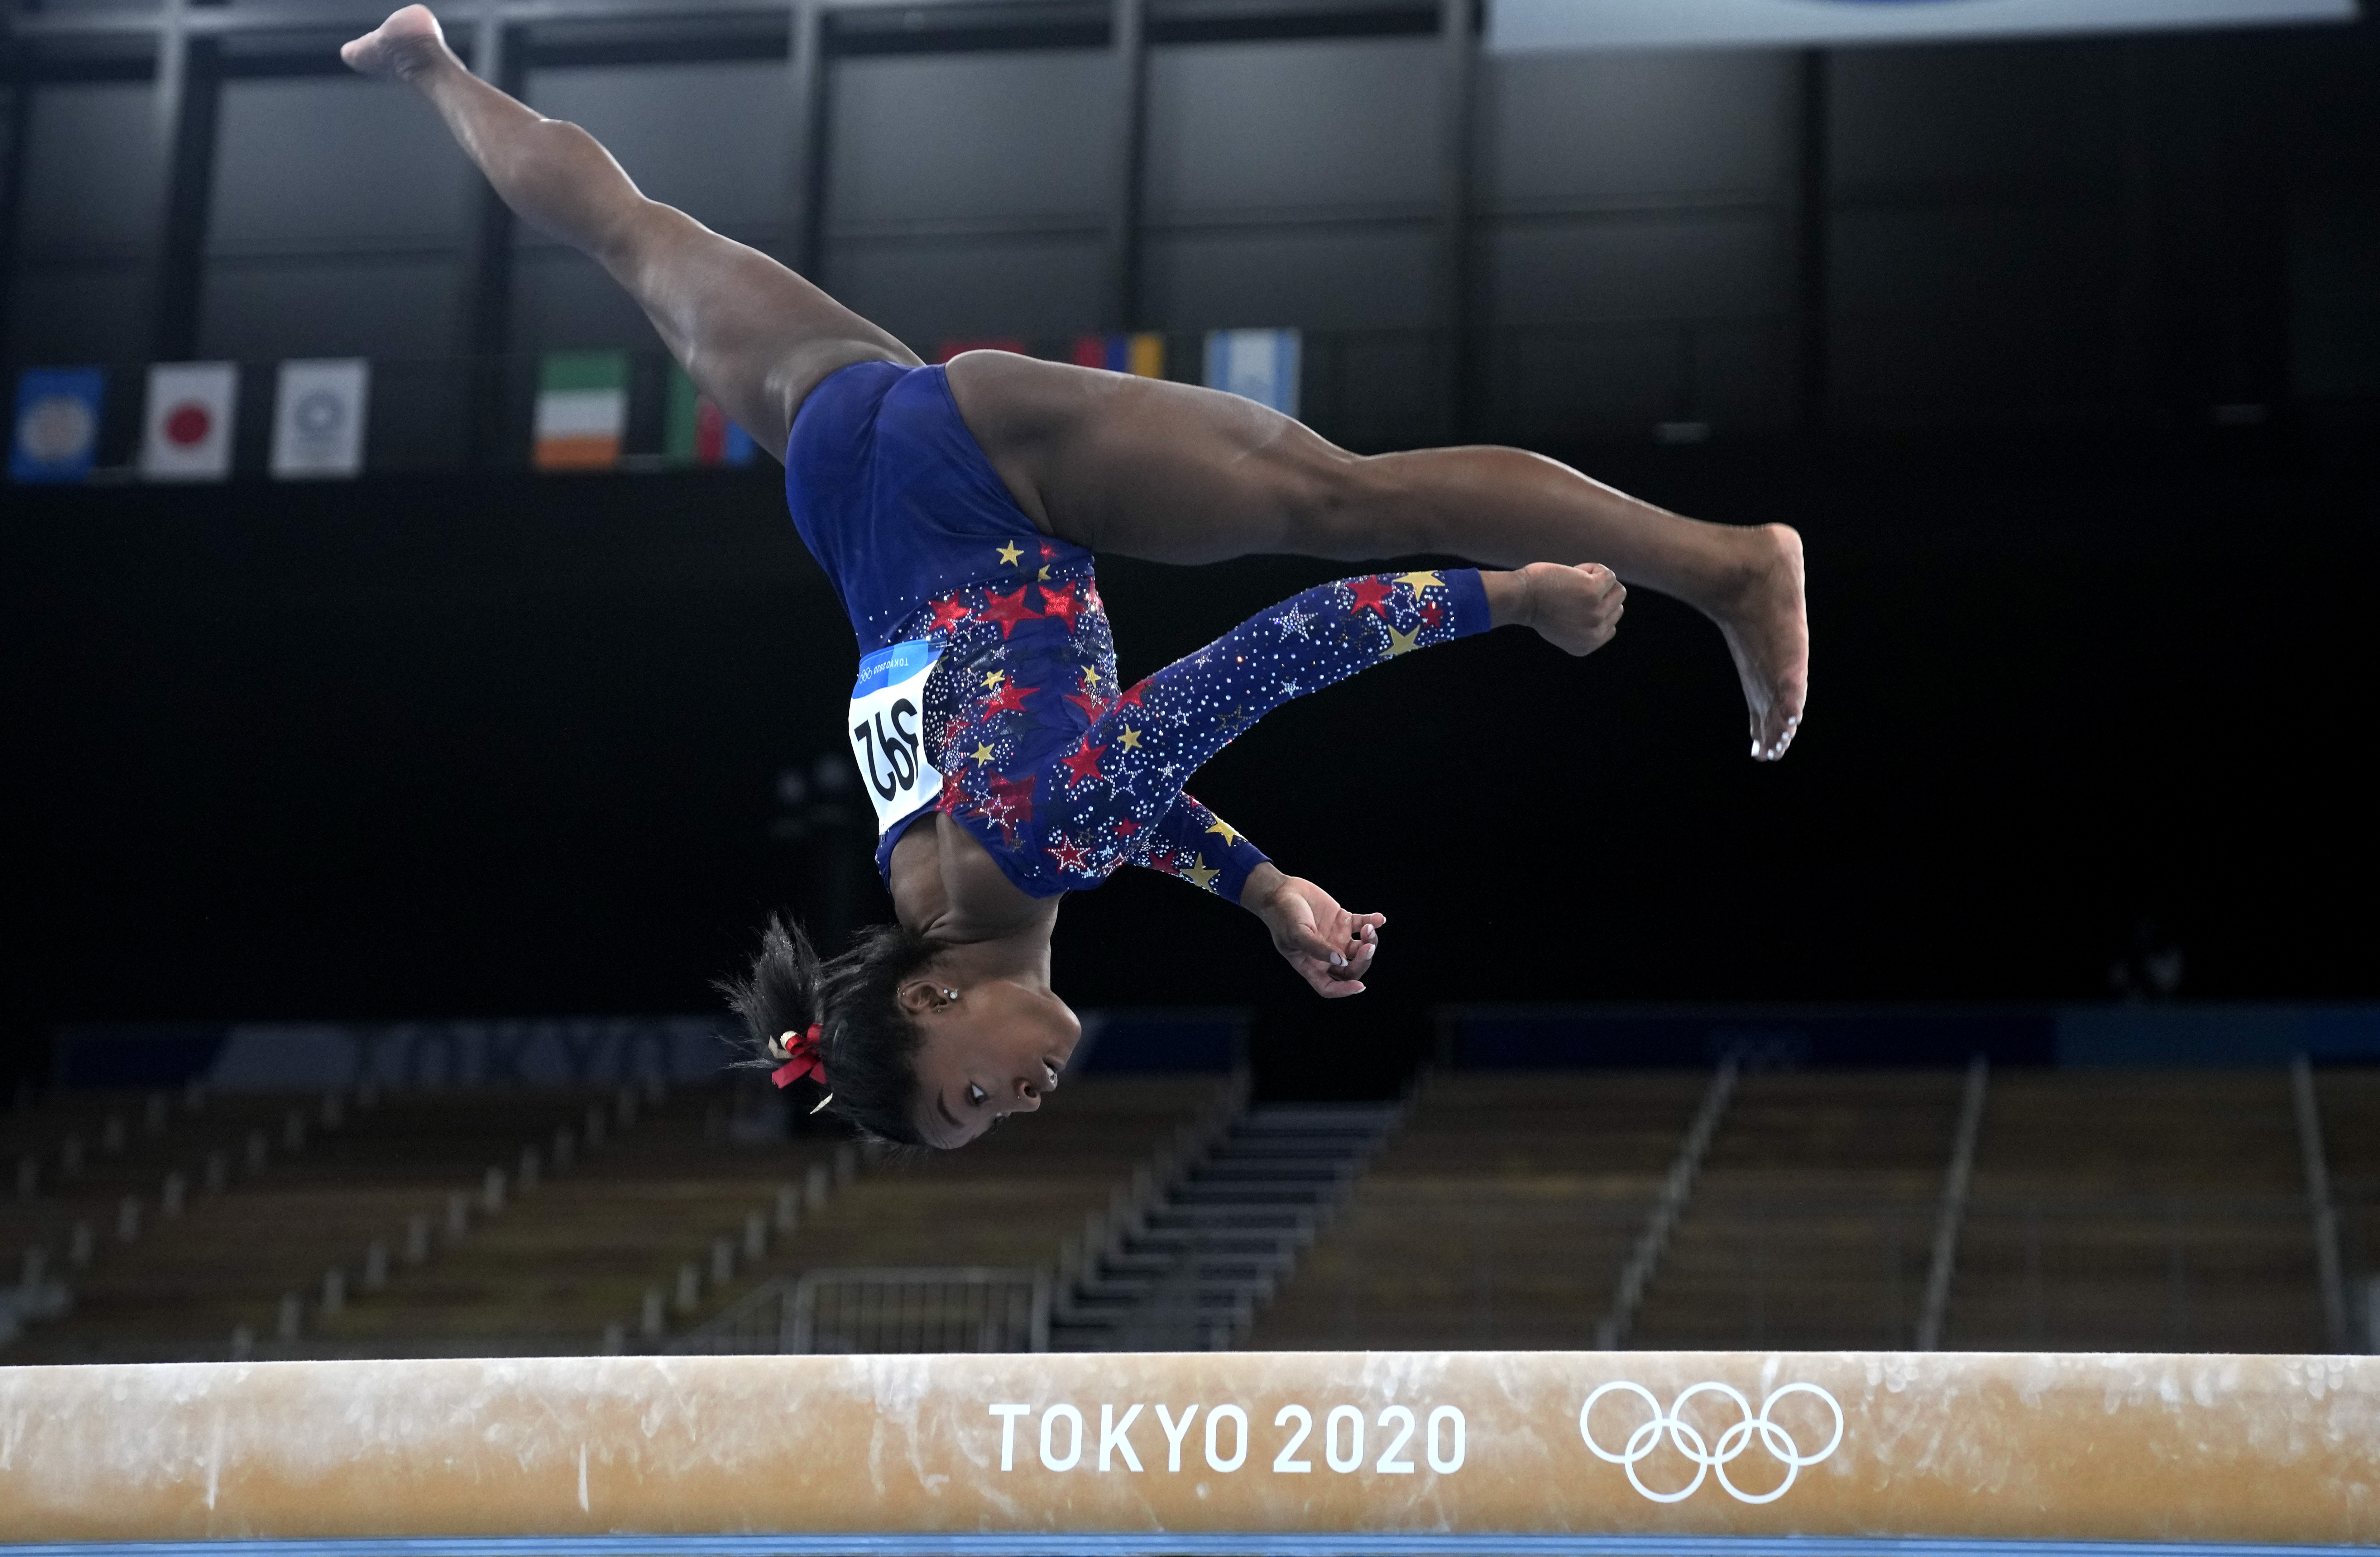 How To Watch Women S Gymnastics Team Finals In Tokyo Olympics 21 Free Live Stream Usa Tv Channel Time To Watch Simone Biles Nj Com